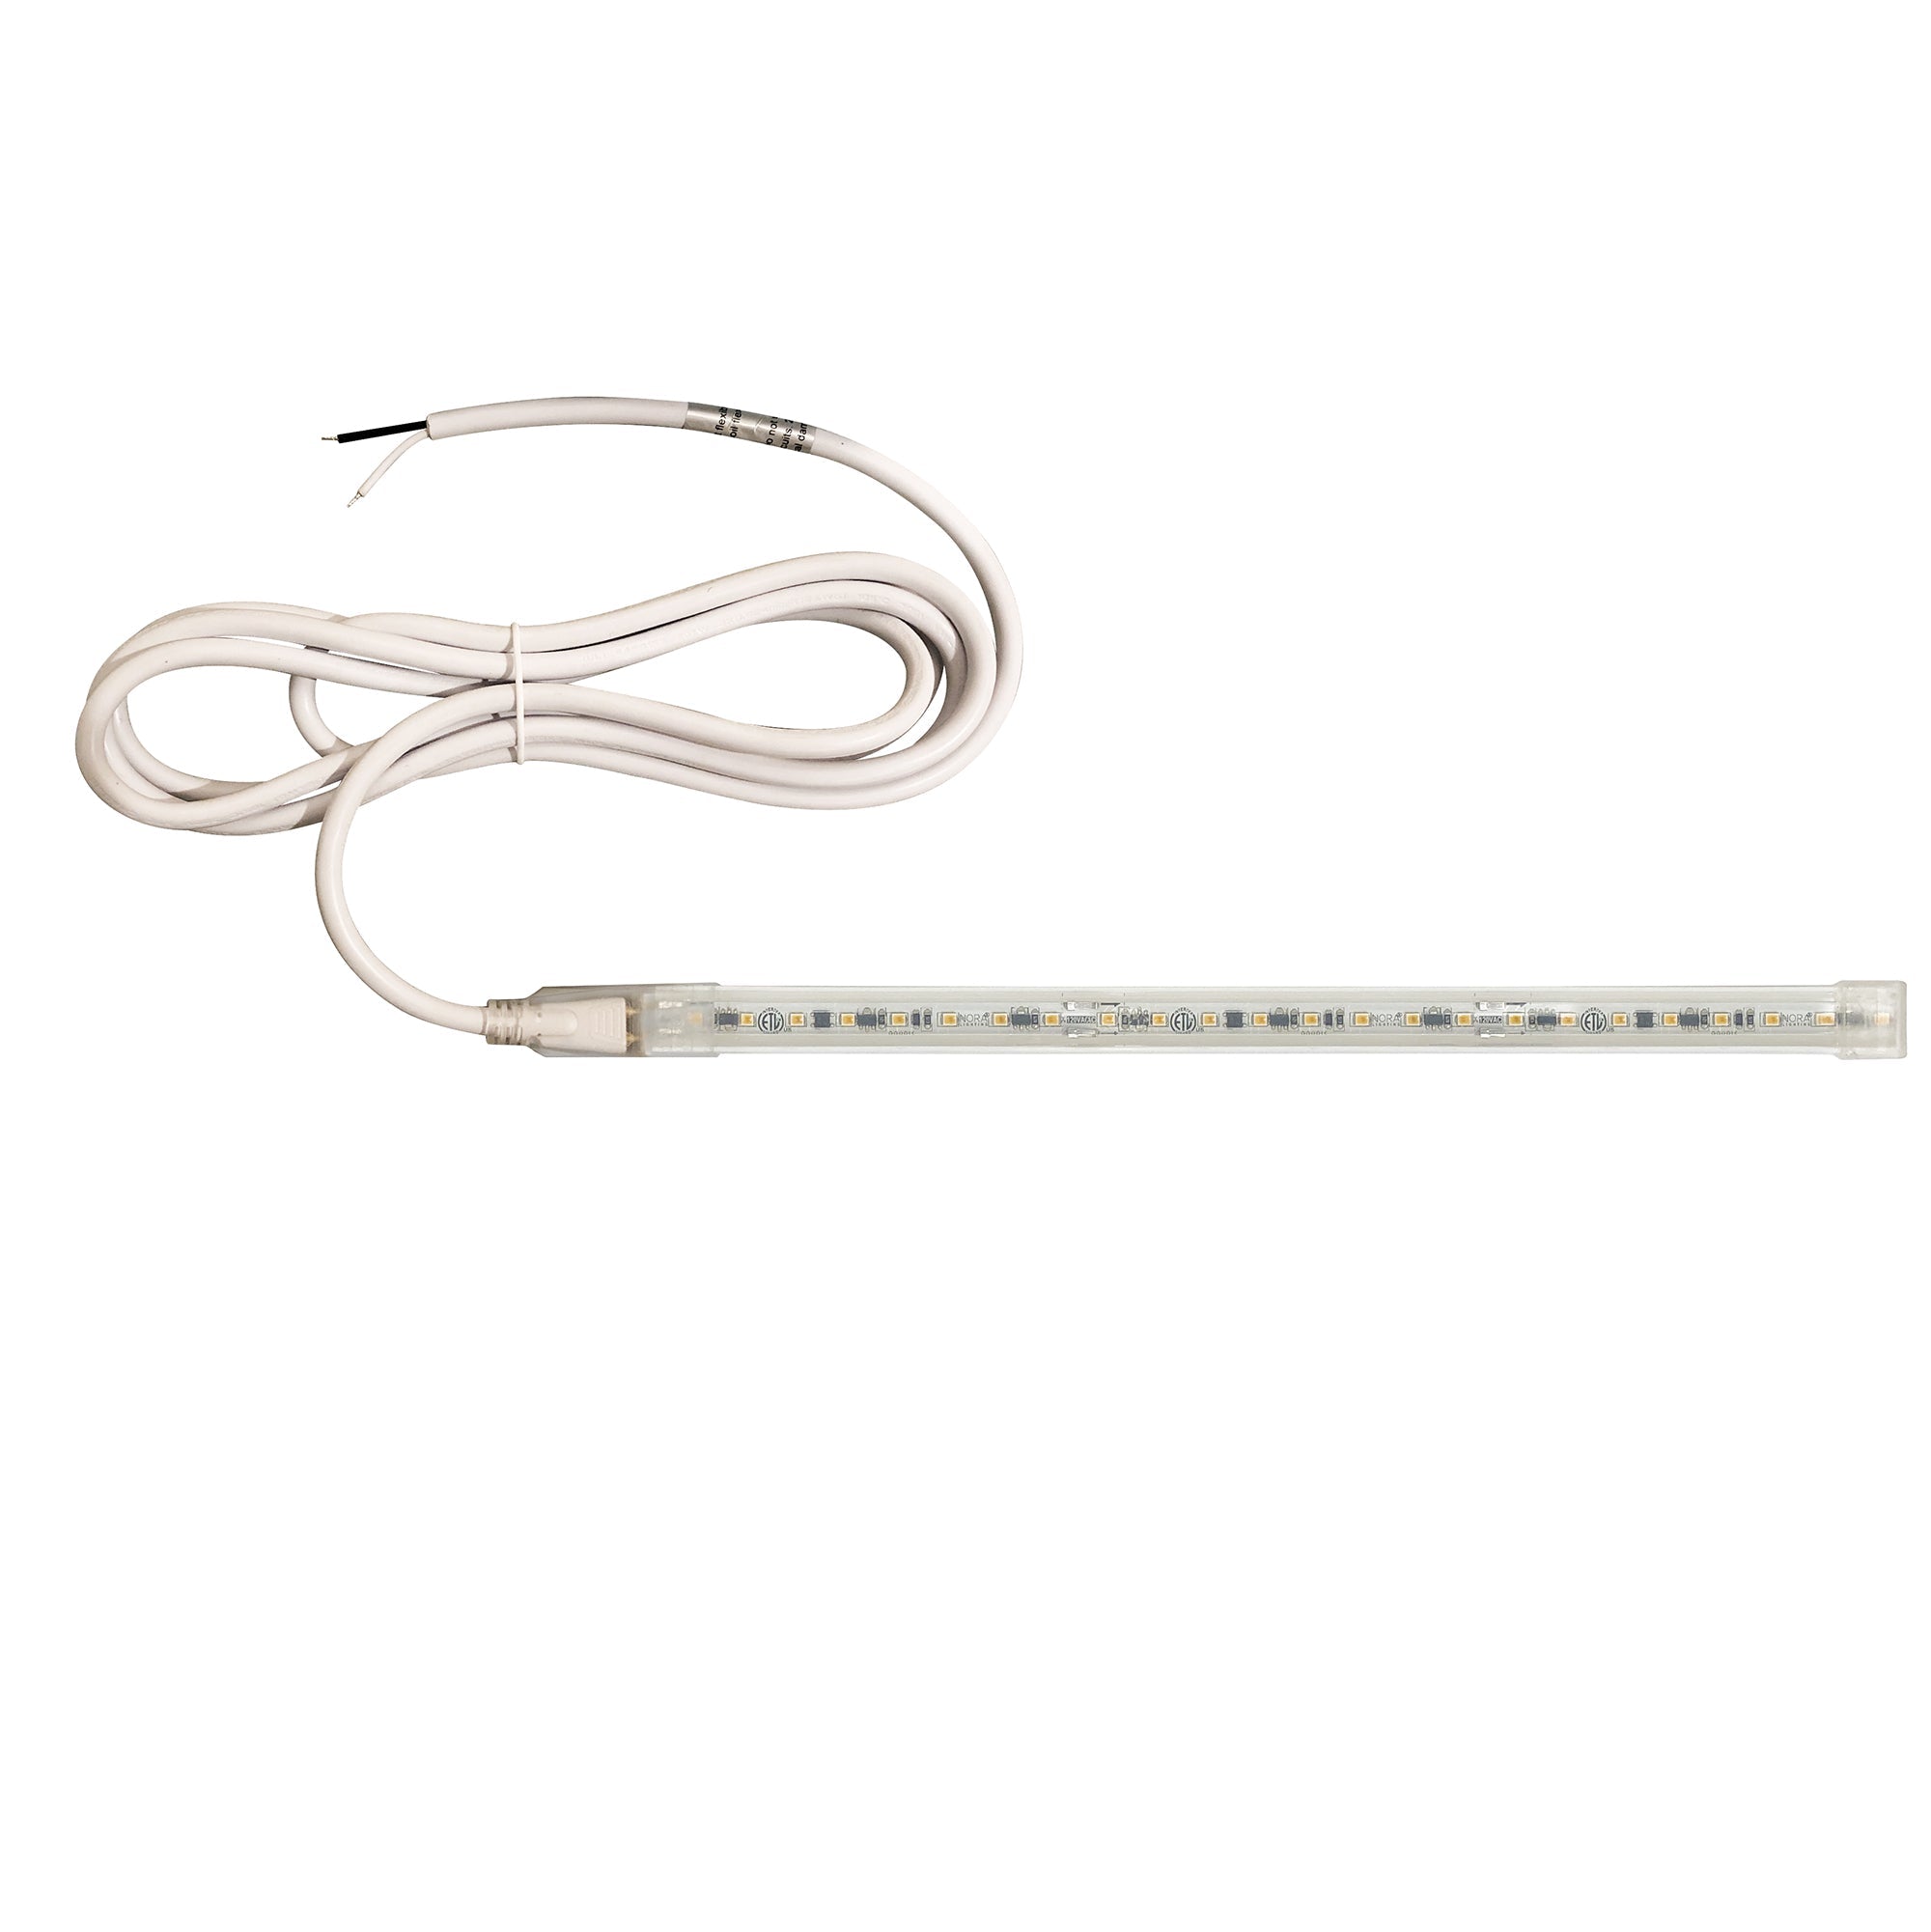 Nora Lighting NUTP13-W47-4-12-927/HW - Accent / Undercabinet - Custom Cut 47-ft, 4-in 120V Continuous LED Tape Light, 330lm / 3.6W per foot, 2700K, w/ Mounting Clips and 8' Hardwired Power Cord